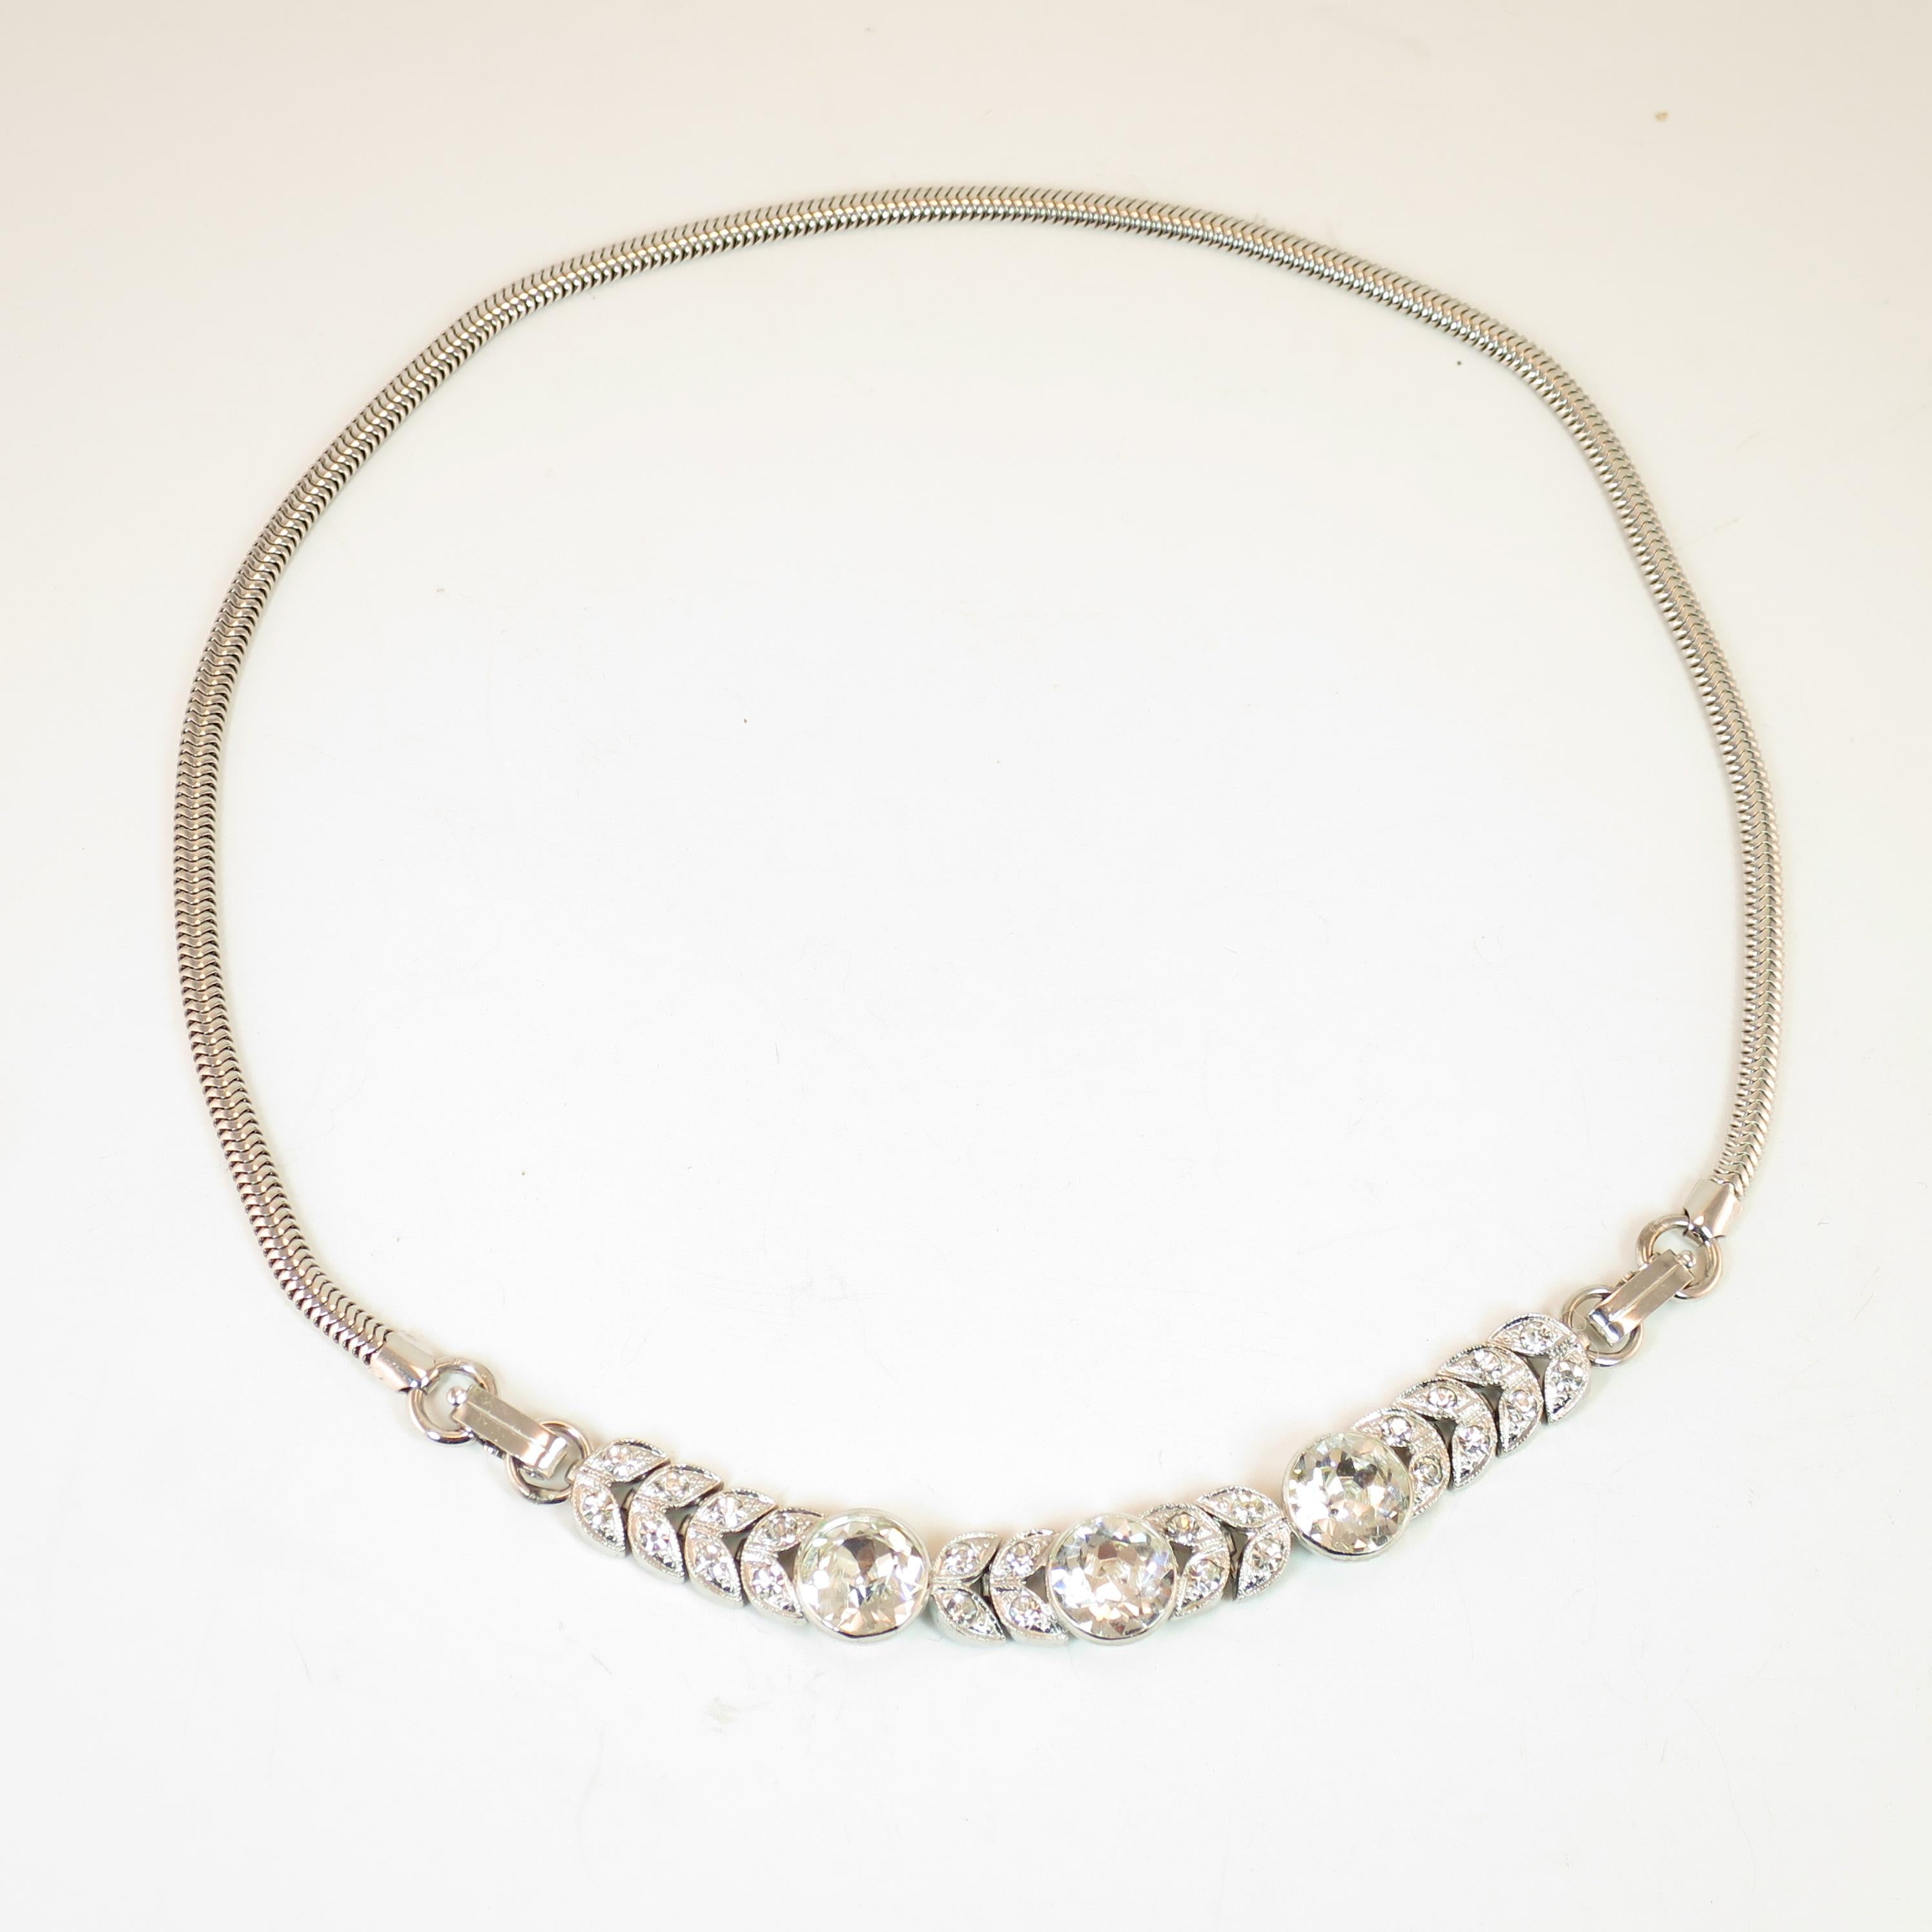 Art Deco Engel Brothers Rhodium Sterling & Crystal Necklace In Excellent Condition For Sale In Burbank, CA